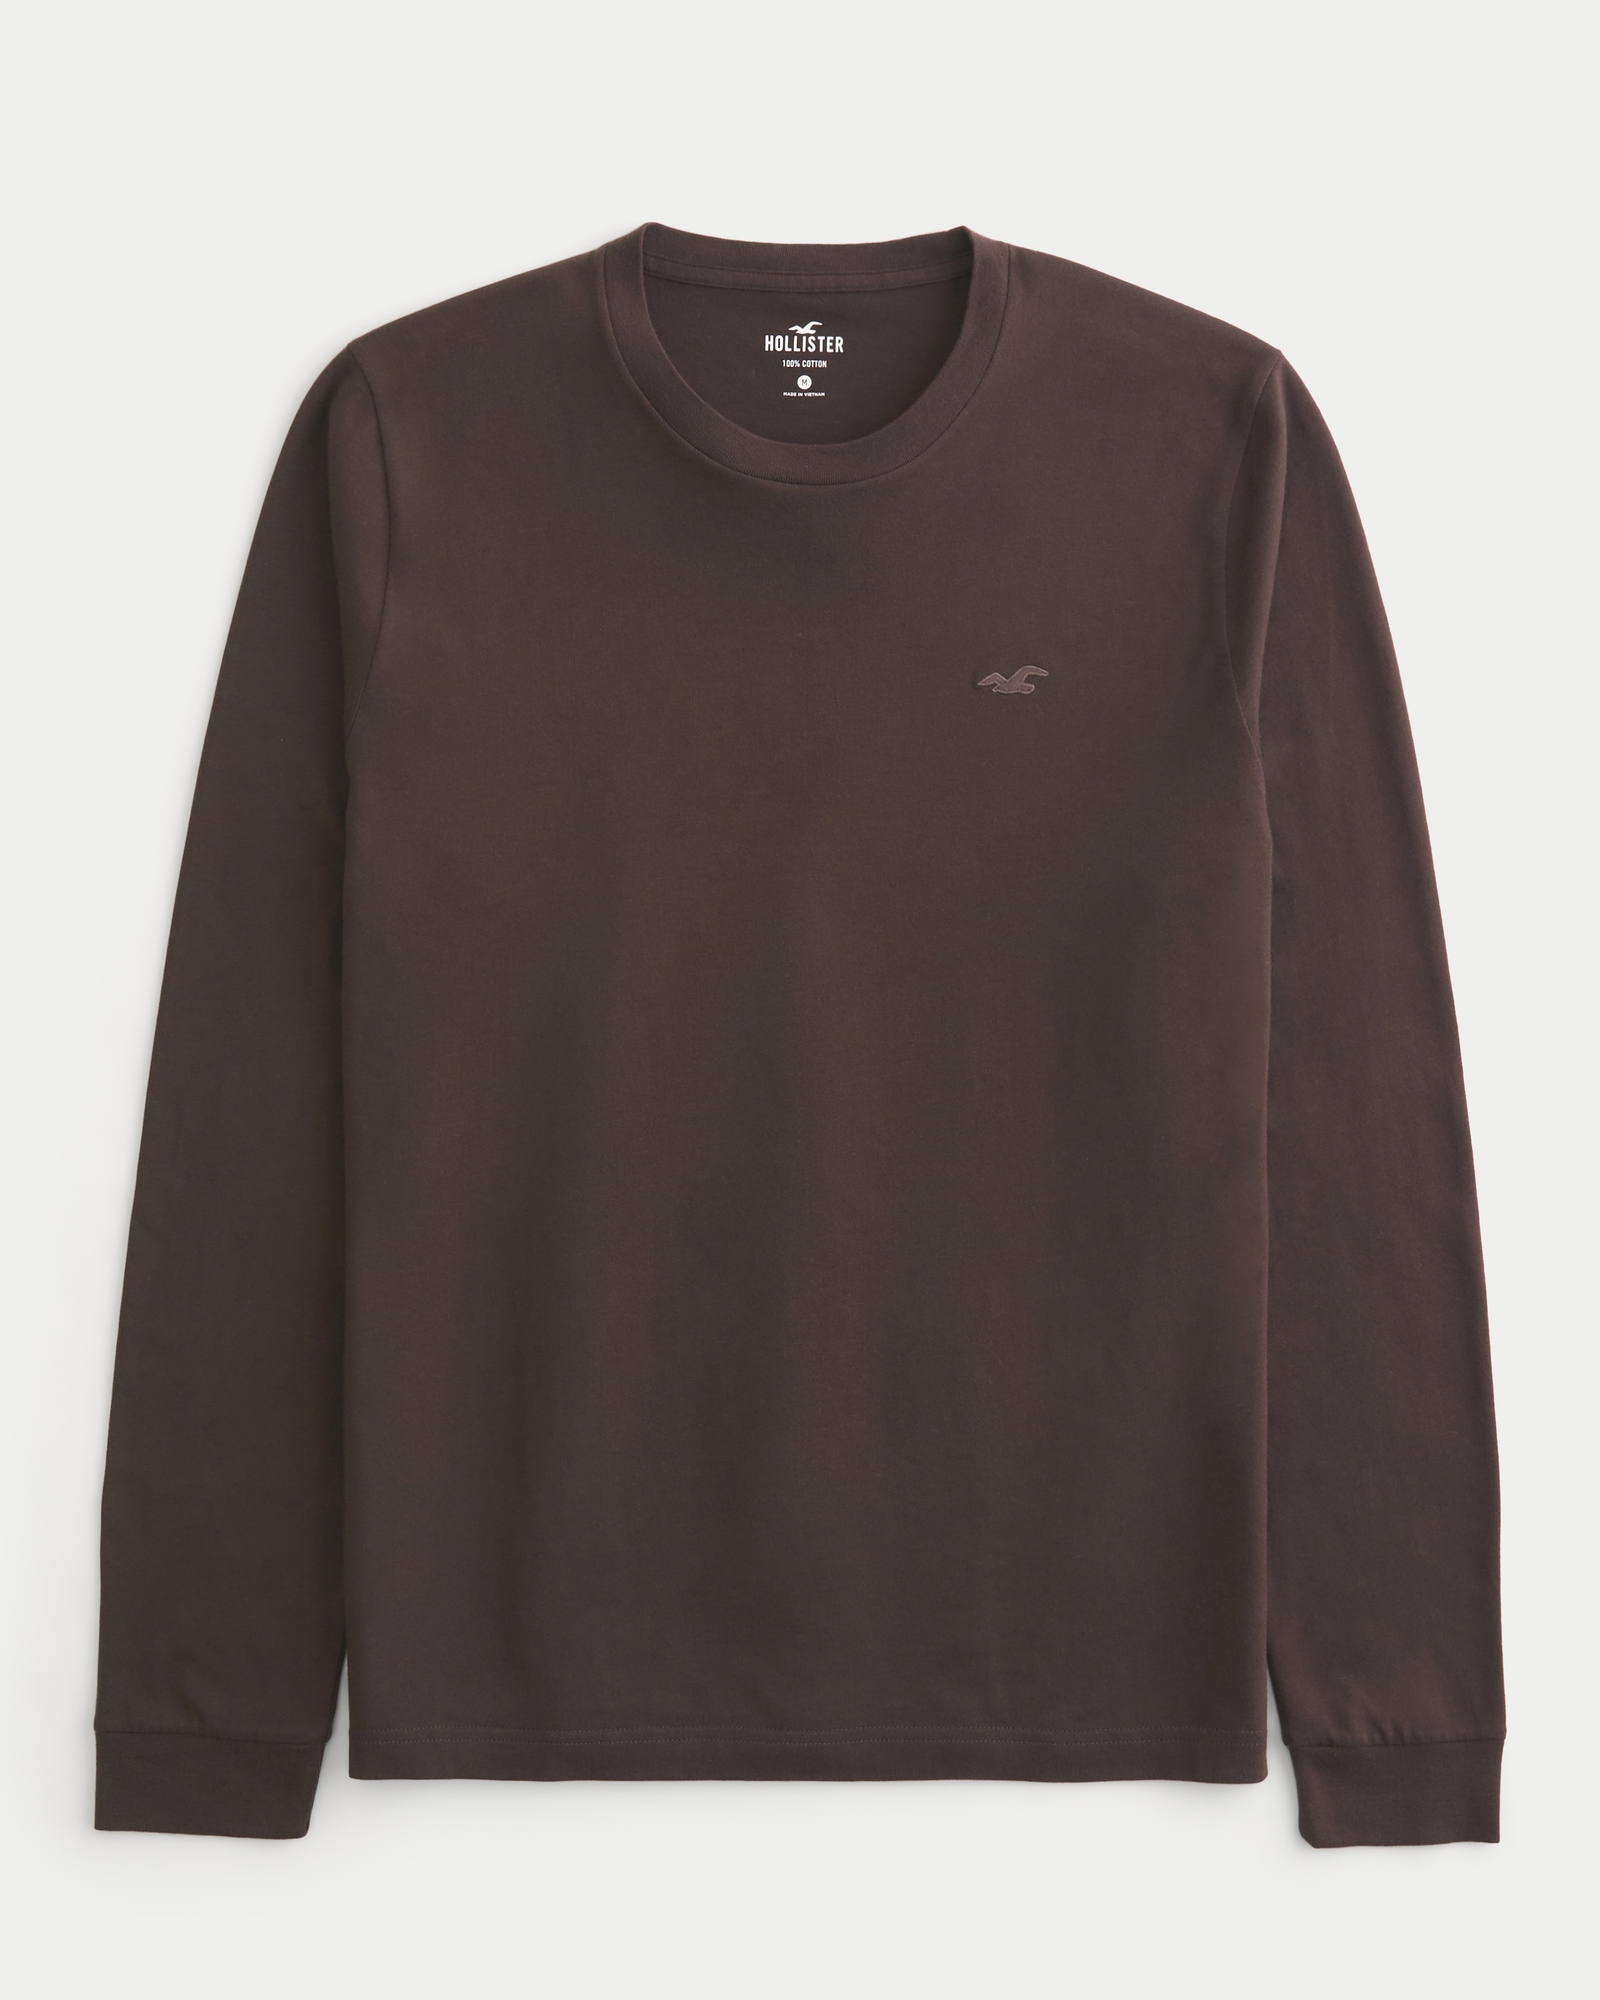 https://img.hollisterco.com/is/image/anf/KIC_324-3150-1264-420_prod1.jpg?policy=product-extra-large